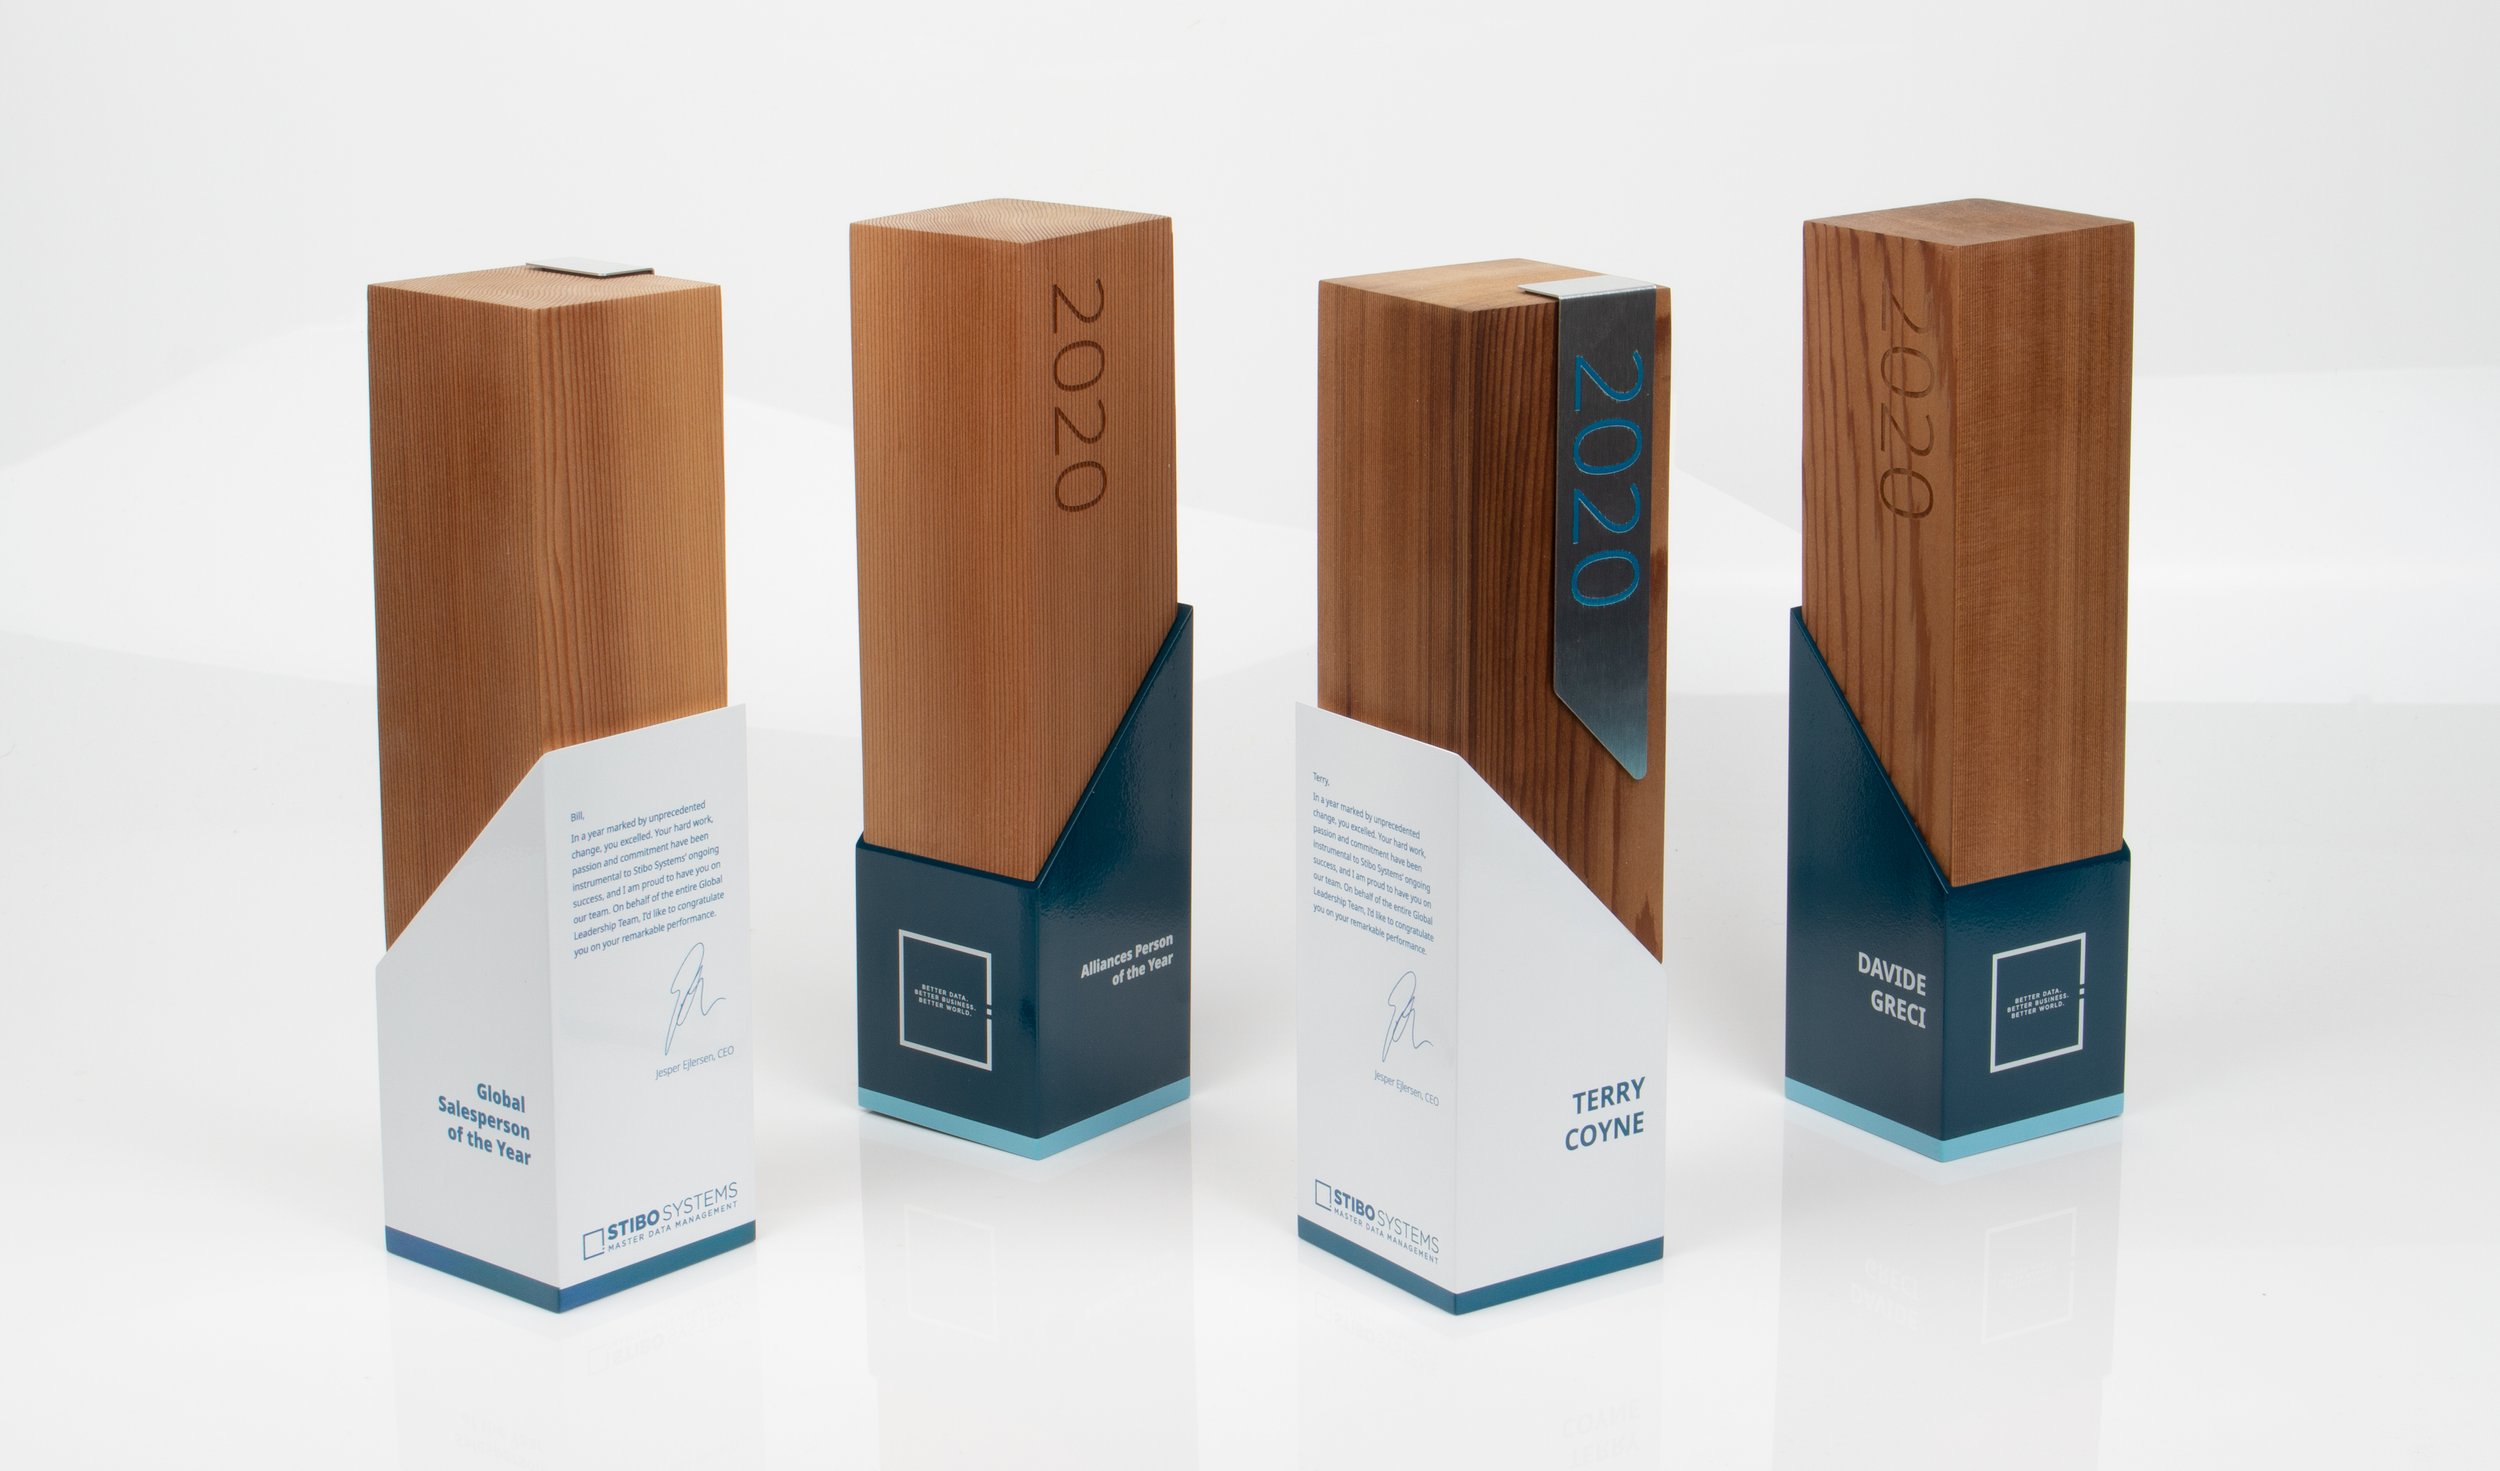 stibo-systems-custom-wooden-and-metal-aawards.jpg